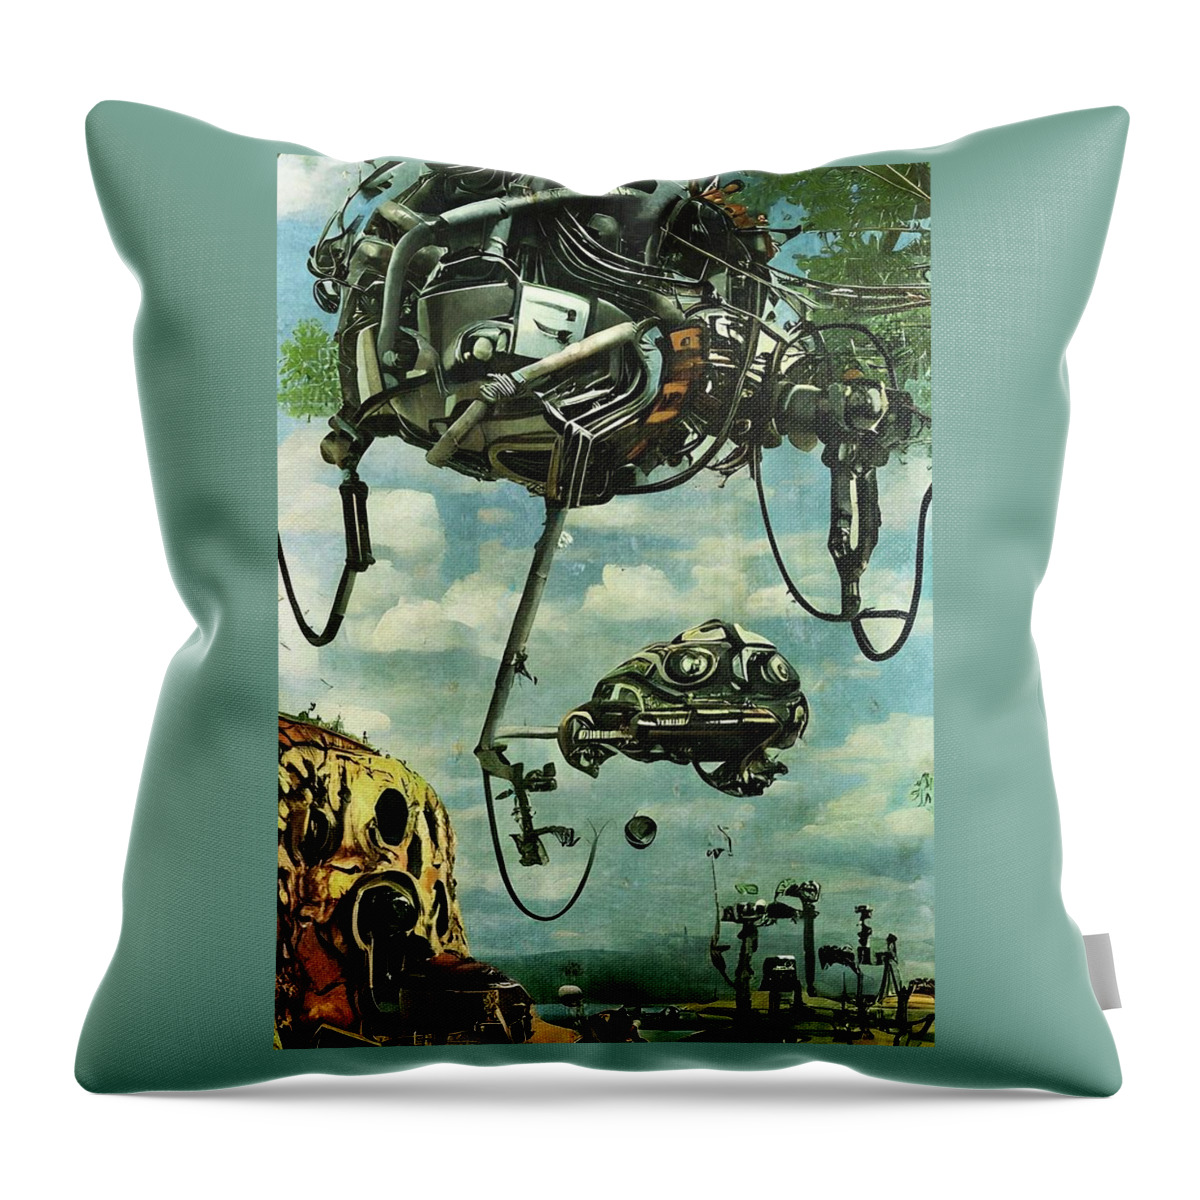 Robots Throw Pillow featuring the digital art Low On Fuel by Ally White